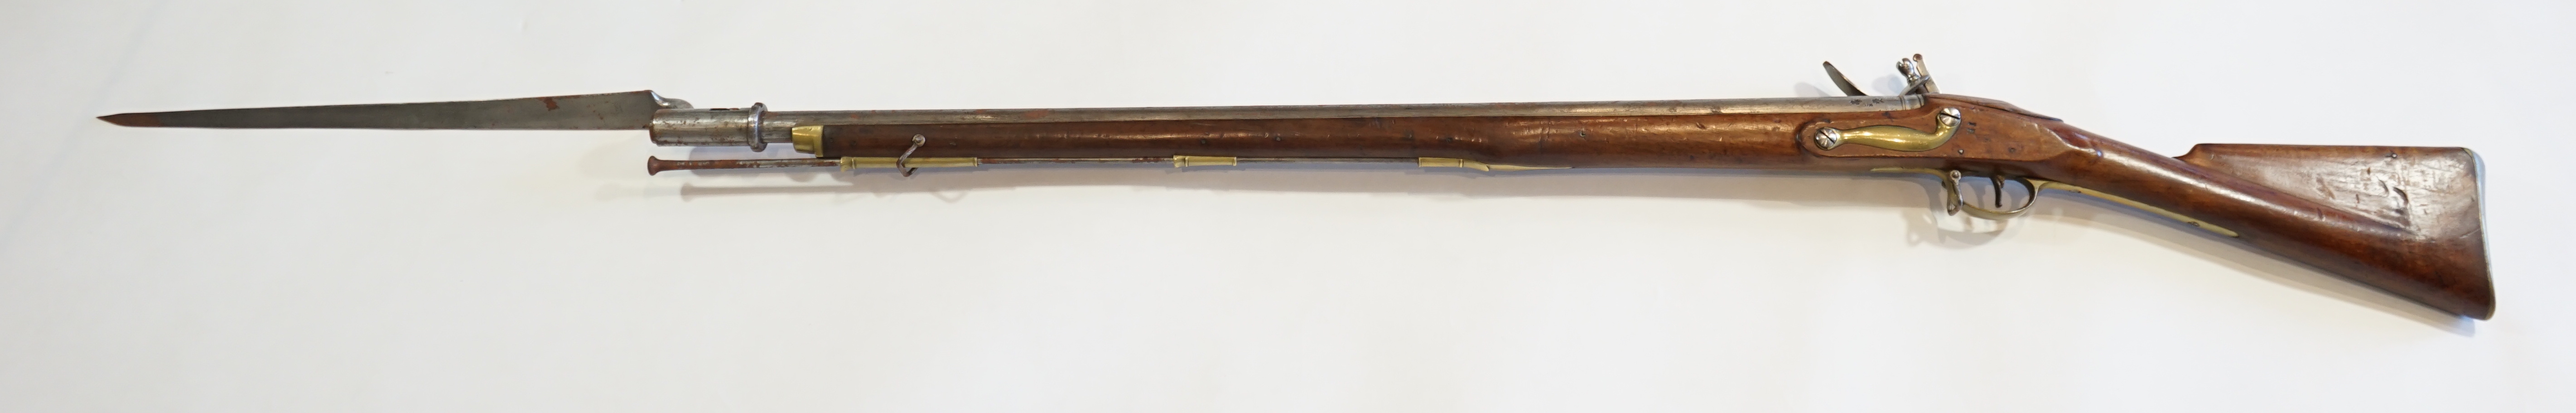 A 10 bore Brown Bess British military flintlock musket, barrel length 36.5 inches